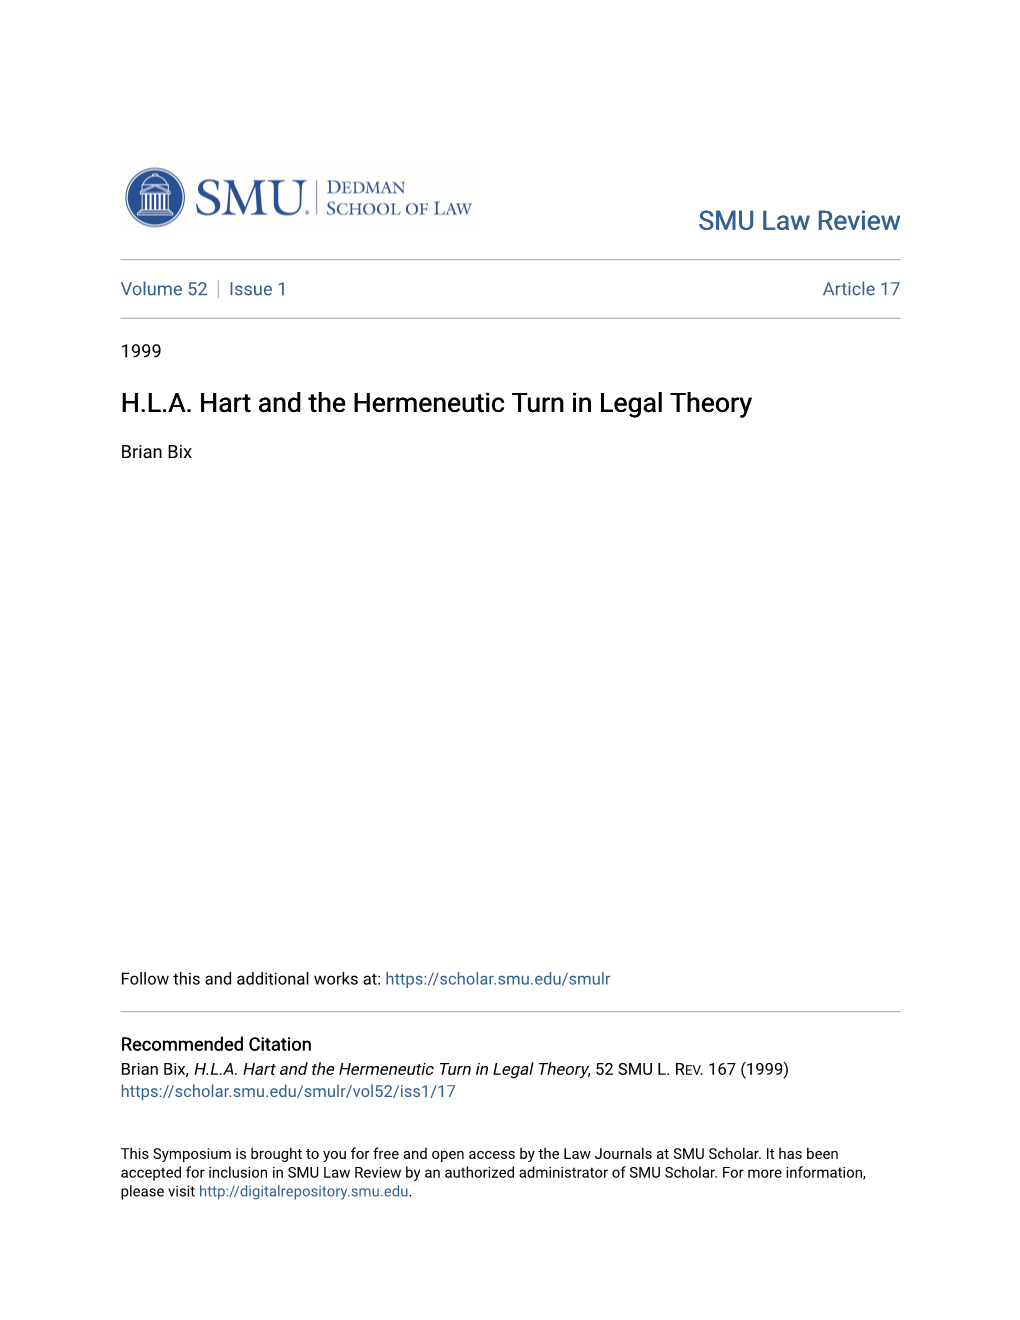 H.L.A. Hart and the Hermeneutic Turn in Legal Theory